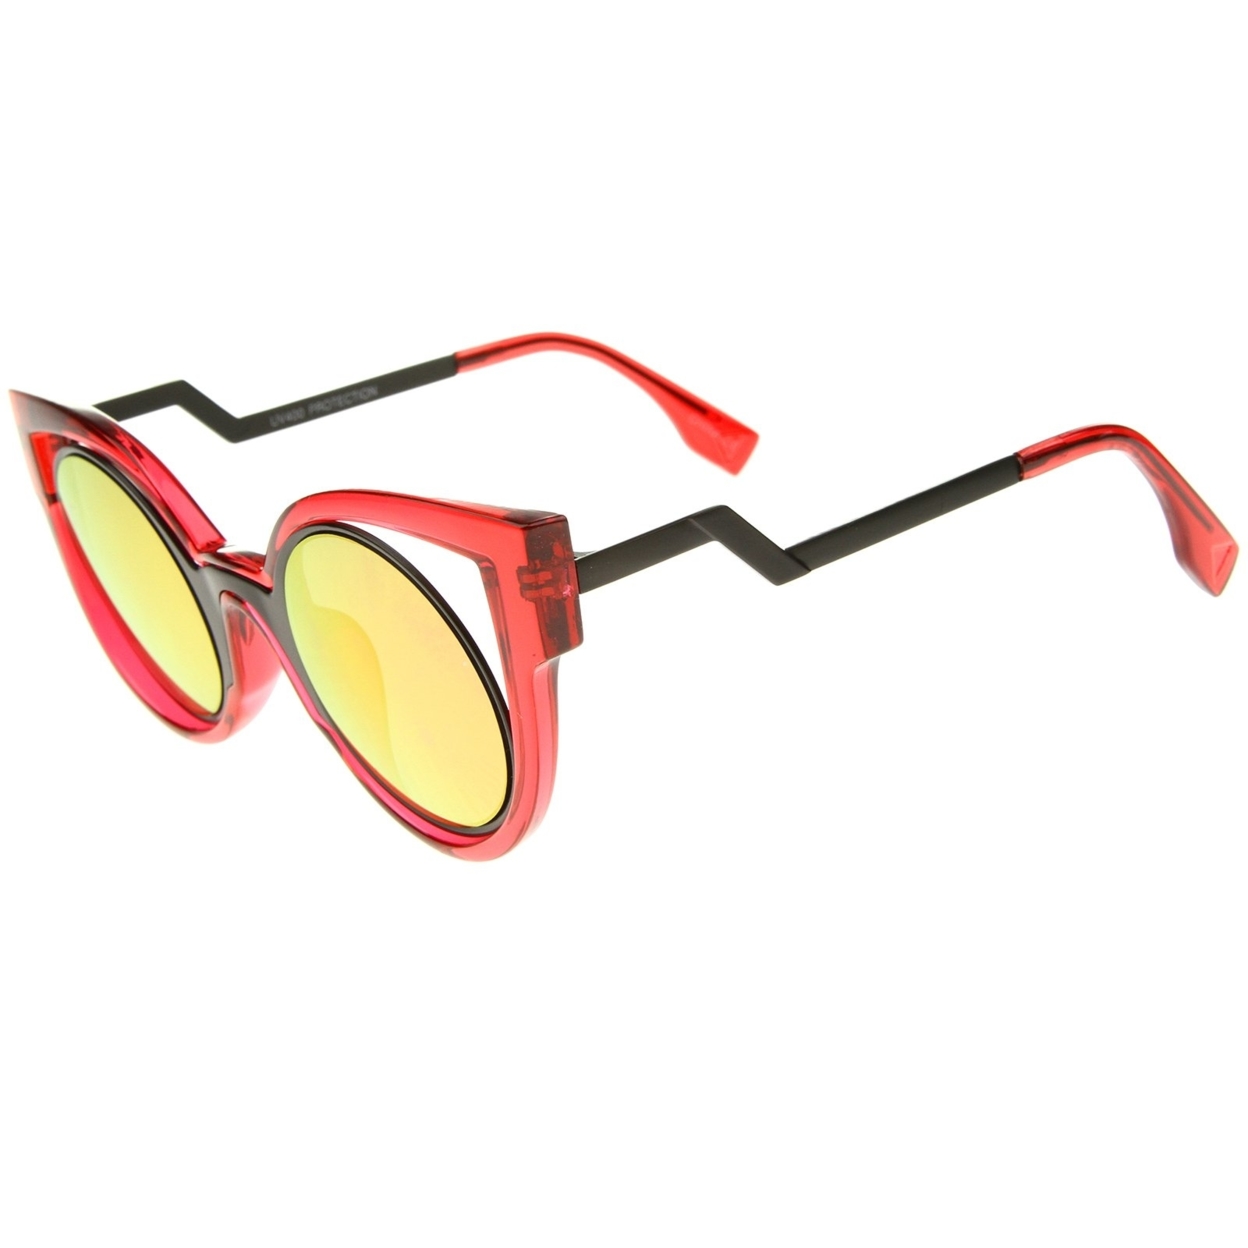 High Fashion Translucent Frame Stepped Temple Two-Tone Cat Eye Sunglasses - Red-Black / Red Mirror